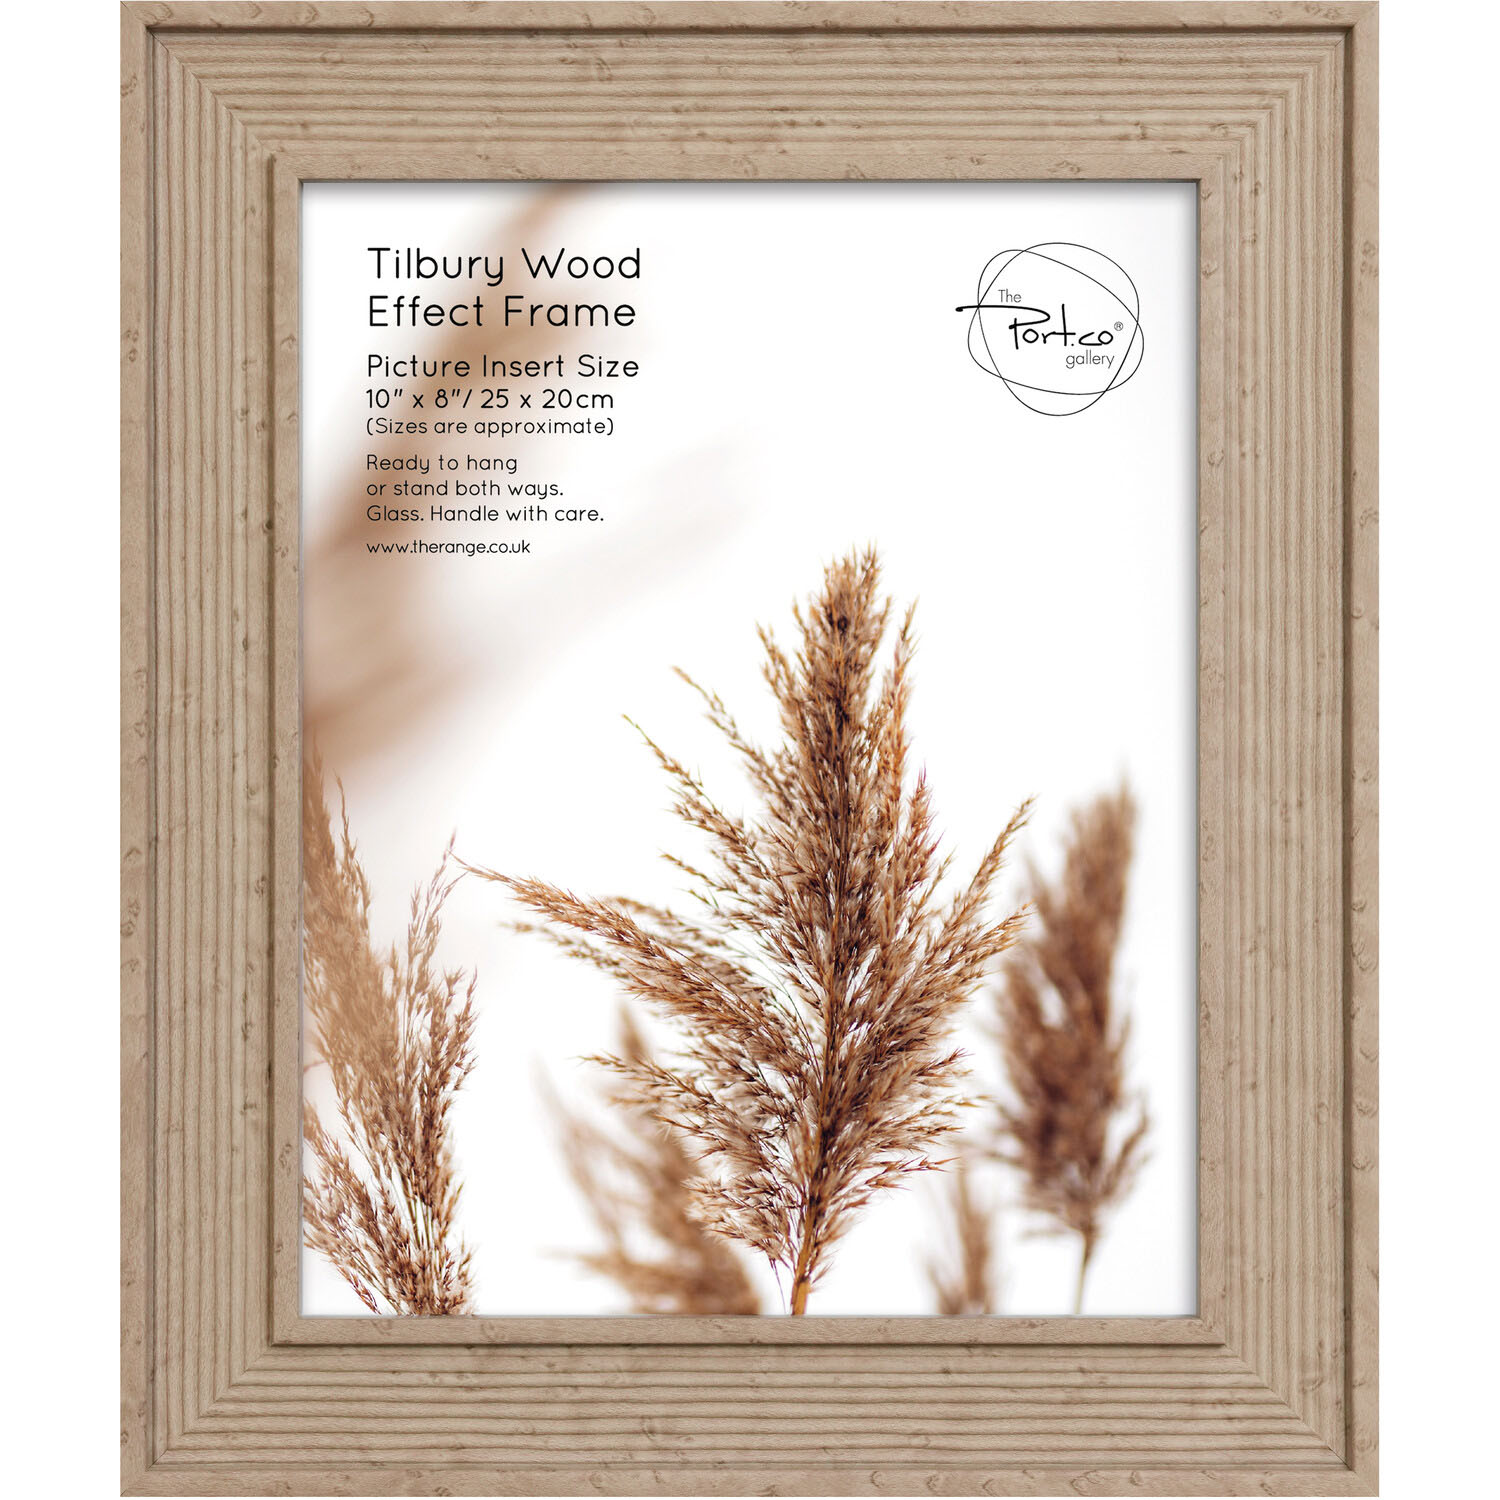 The Port. Co Gallery Tilbury Wood Effect Photo Frame 10 x 8 inch Image 1